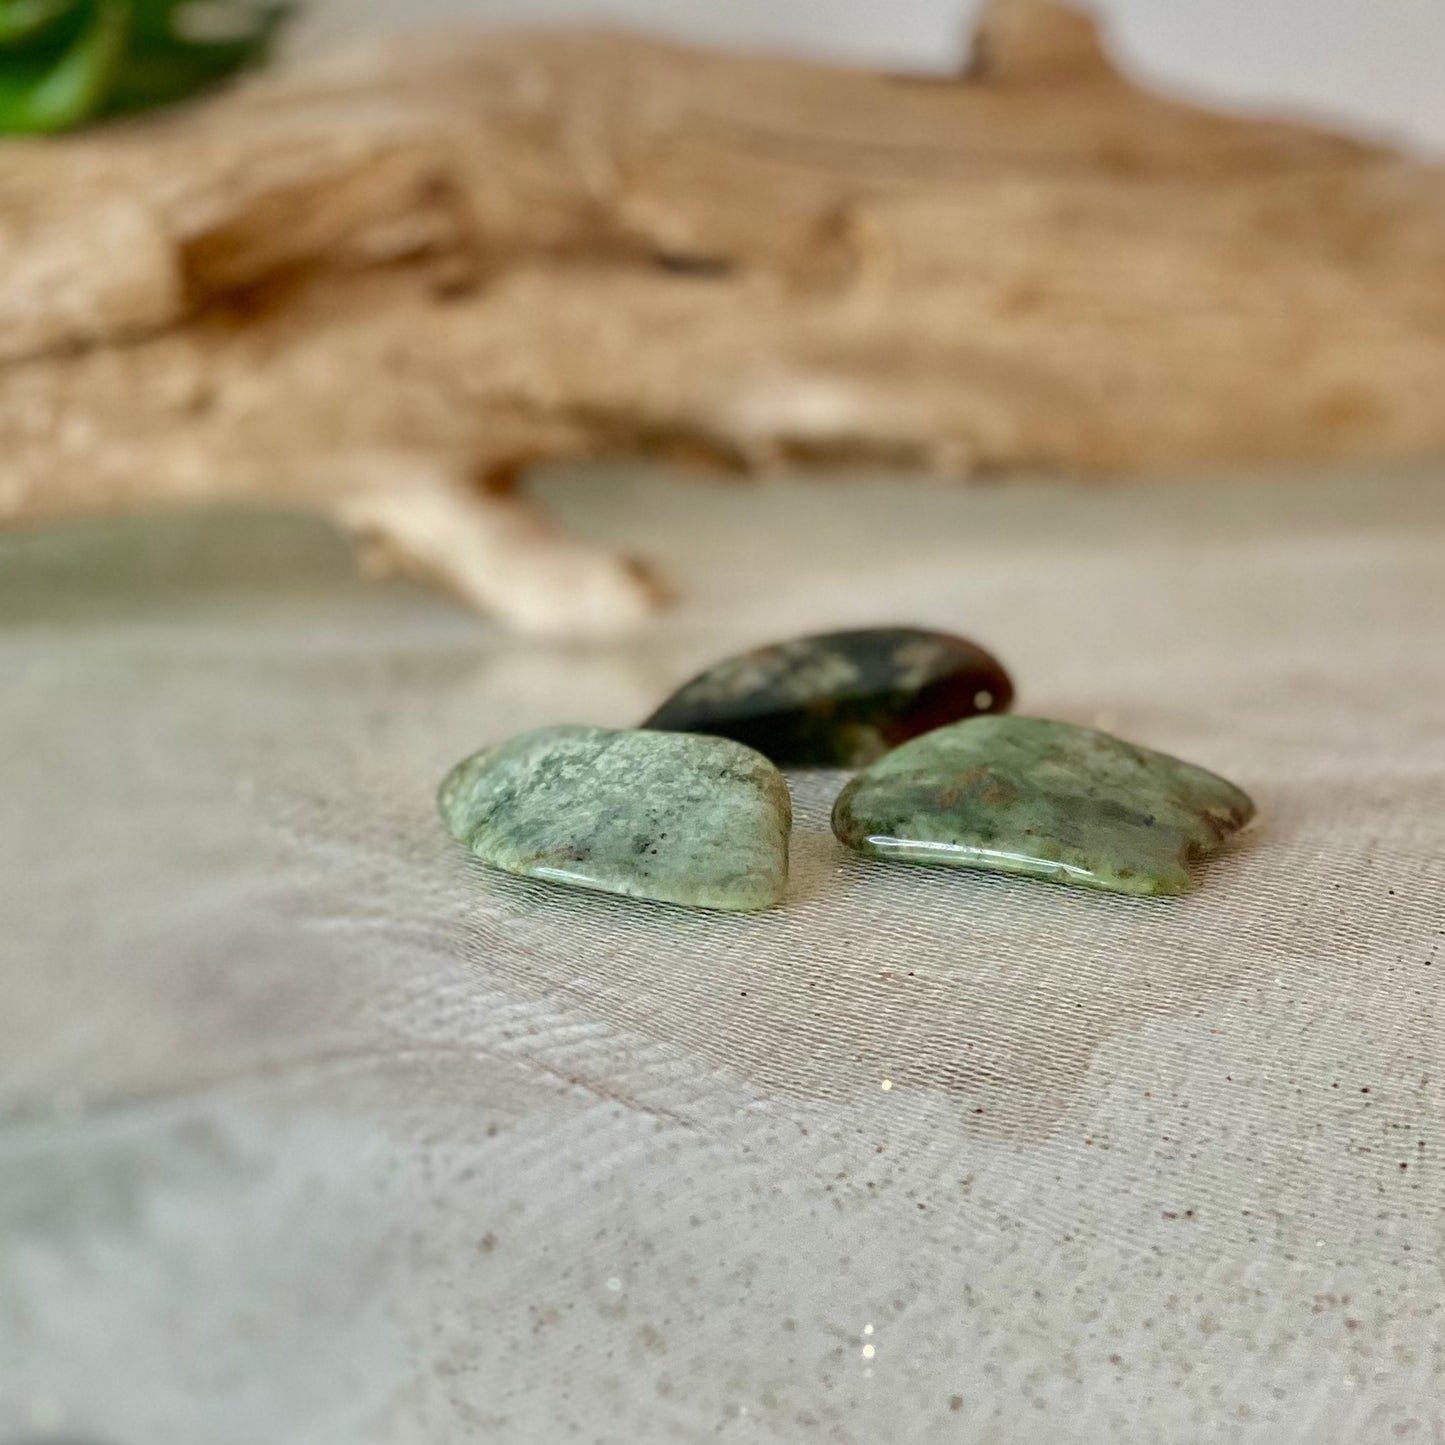 Chrysoprase Tumbled Stones from Madagascar: Nature's Green Serenity